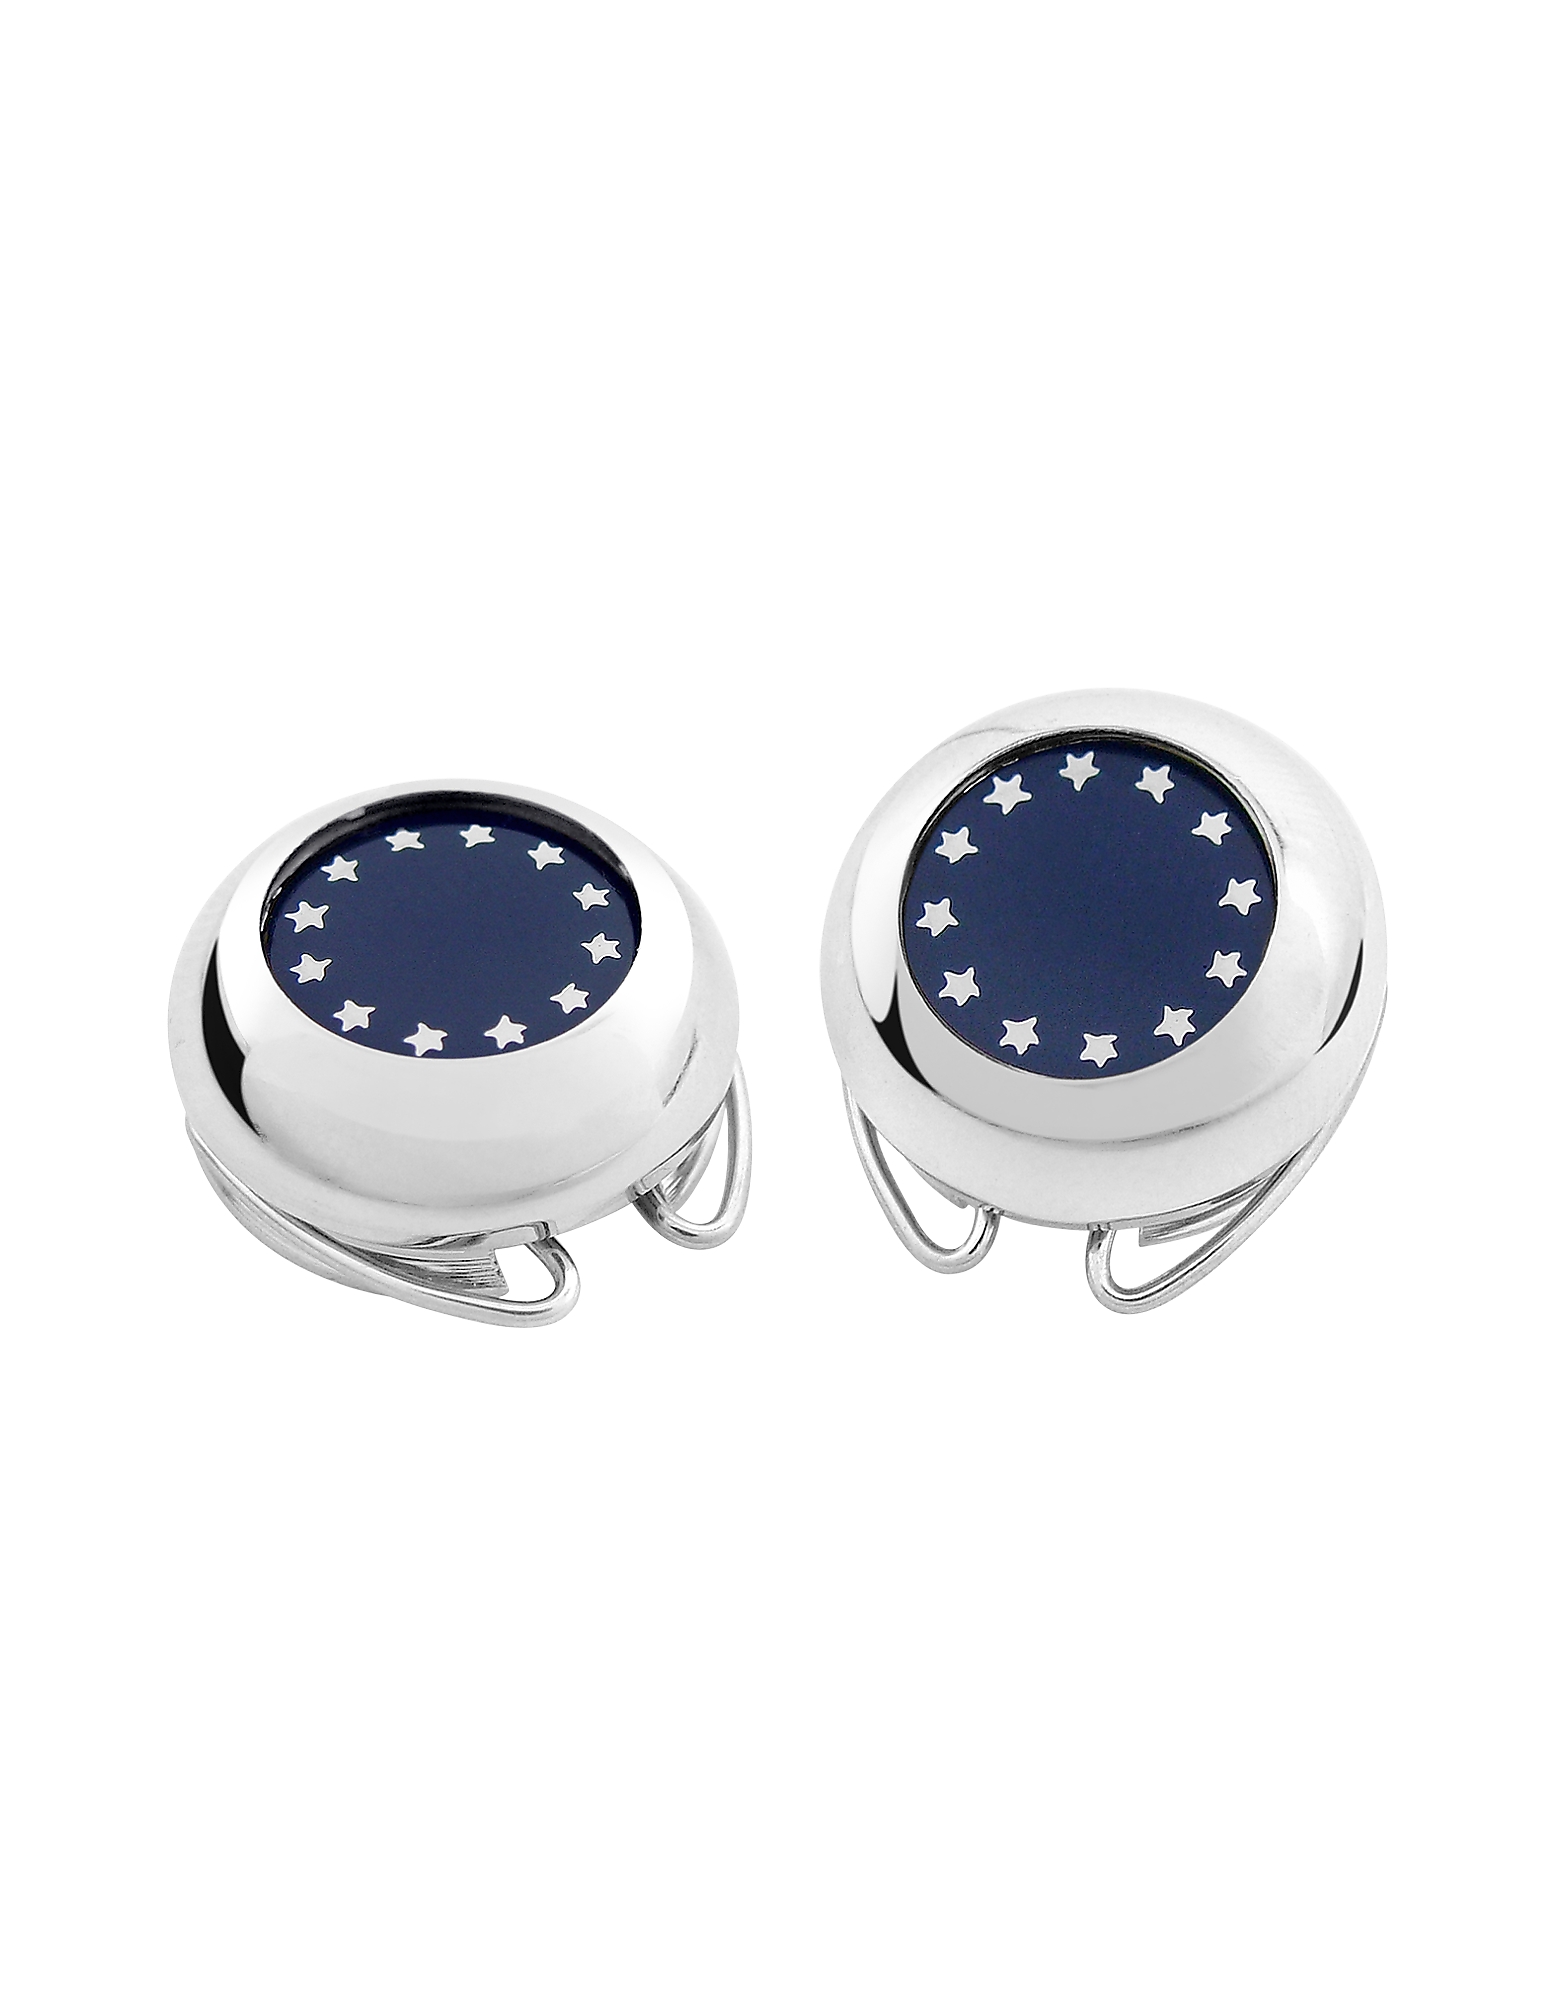 

Silver Plated European Flag Button Covers